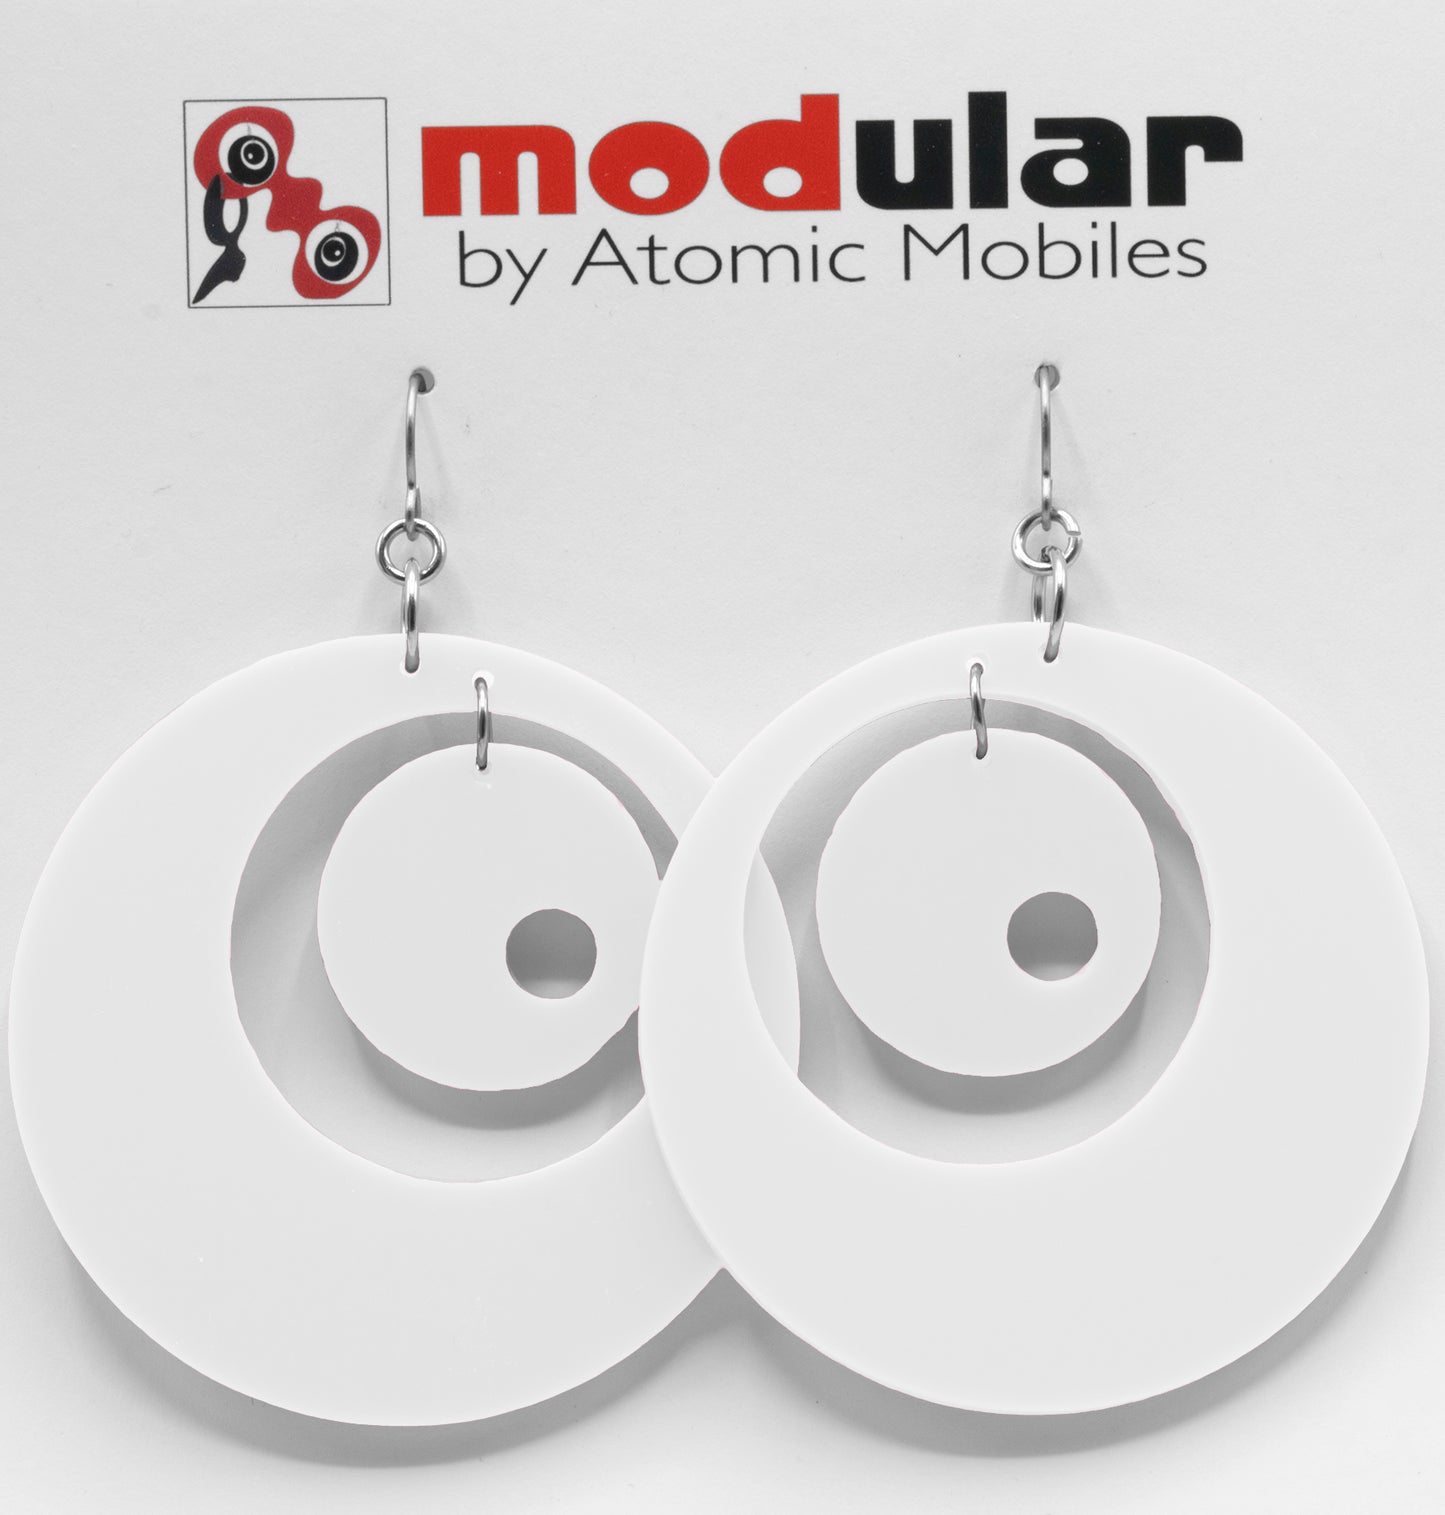 Groovy Statement Earrings in White - space age midcentury retro inspired dangle earrings - handmade jewelry by AtomicMobiles.com